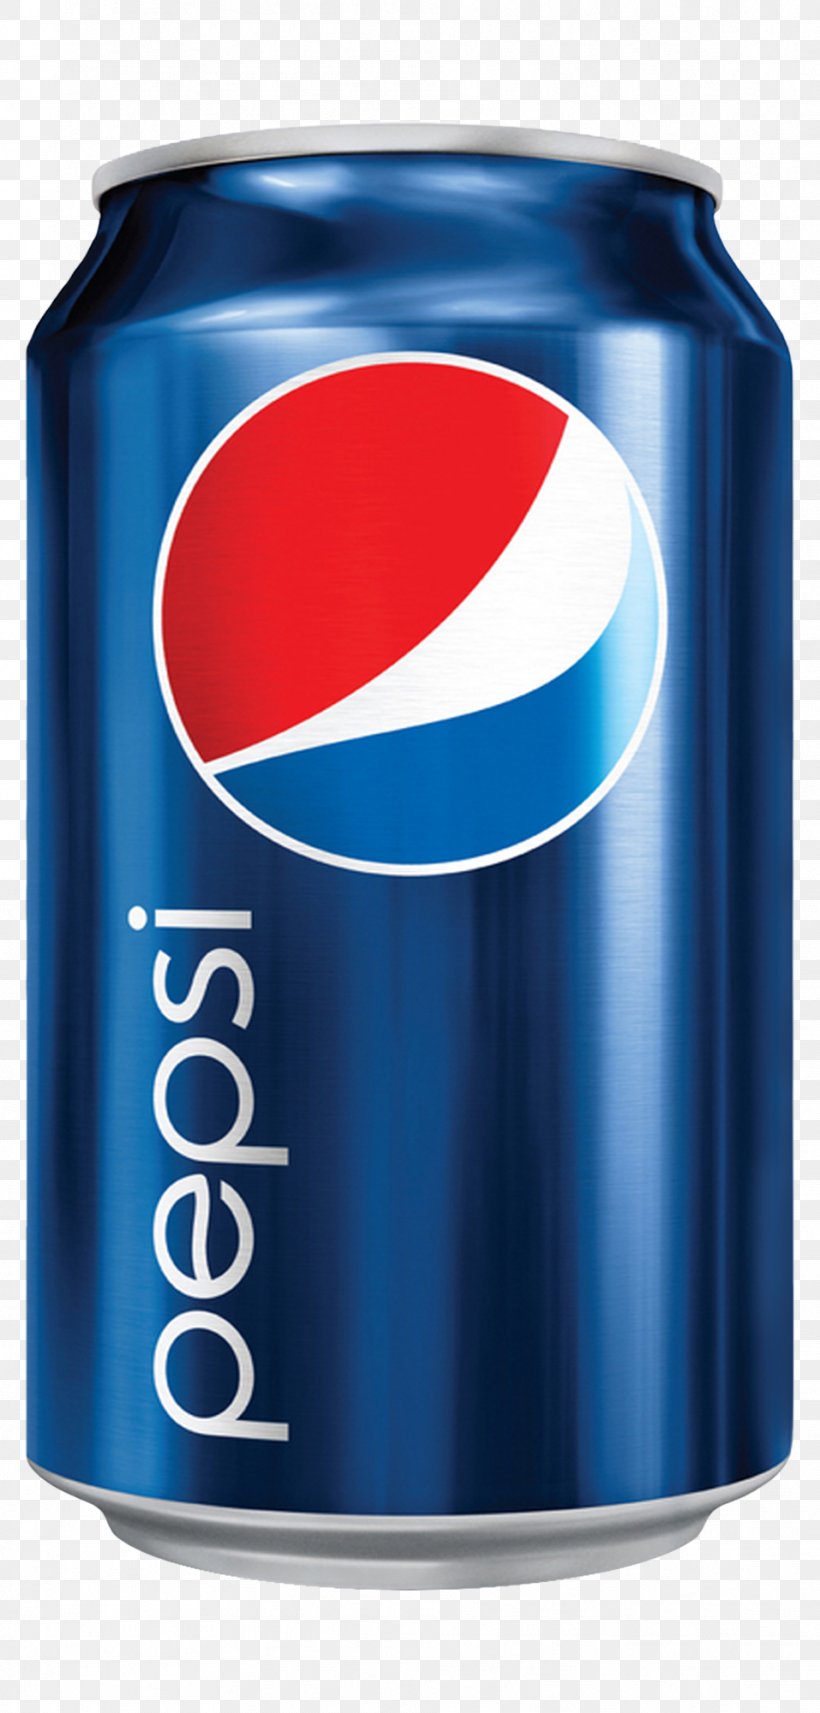 Pepsi Fizzy Drinks Coca-Cola Drink Can, PNG, 957x2000px, Pepsi, Aluminum Can, Caffeinefree Pepsi, Cocacola, Cola Download Free